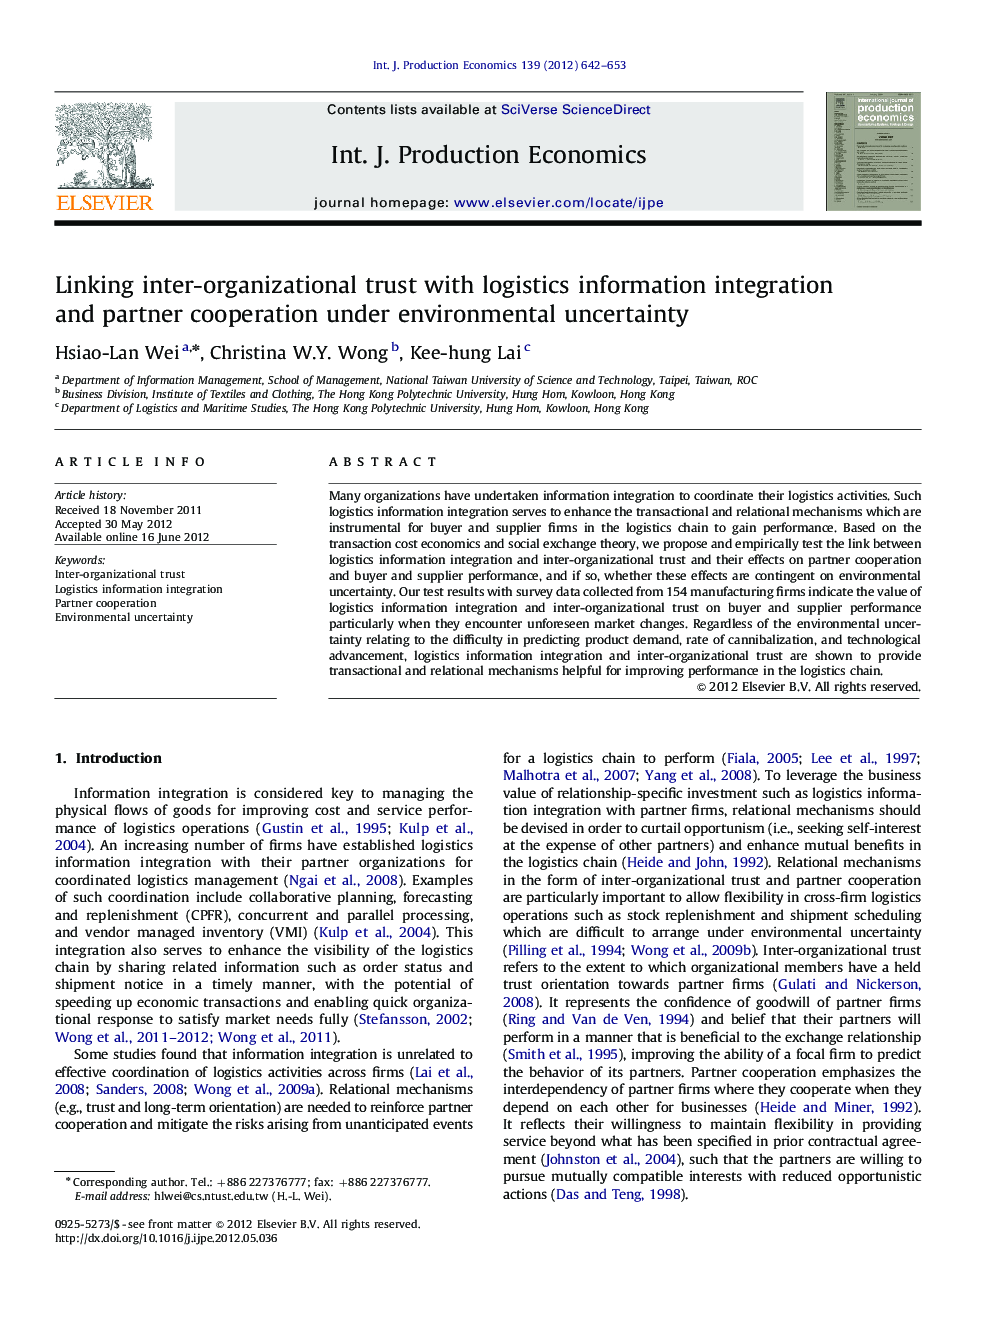 Linking inter-organizational trust with logistics information integration and partner cooperation under environmental uncertainty